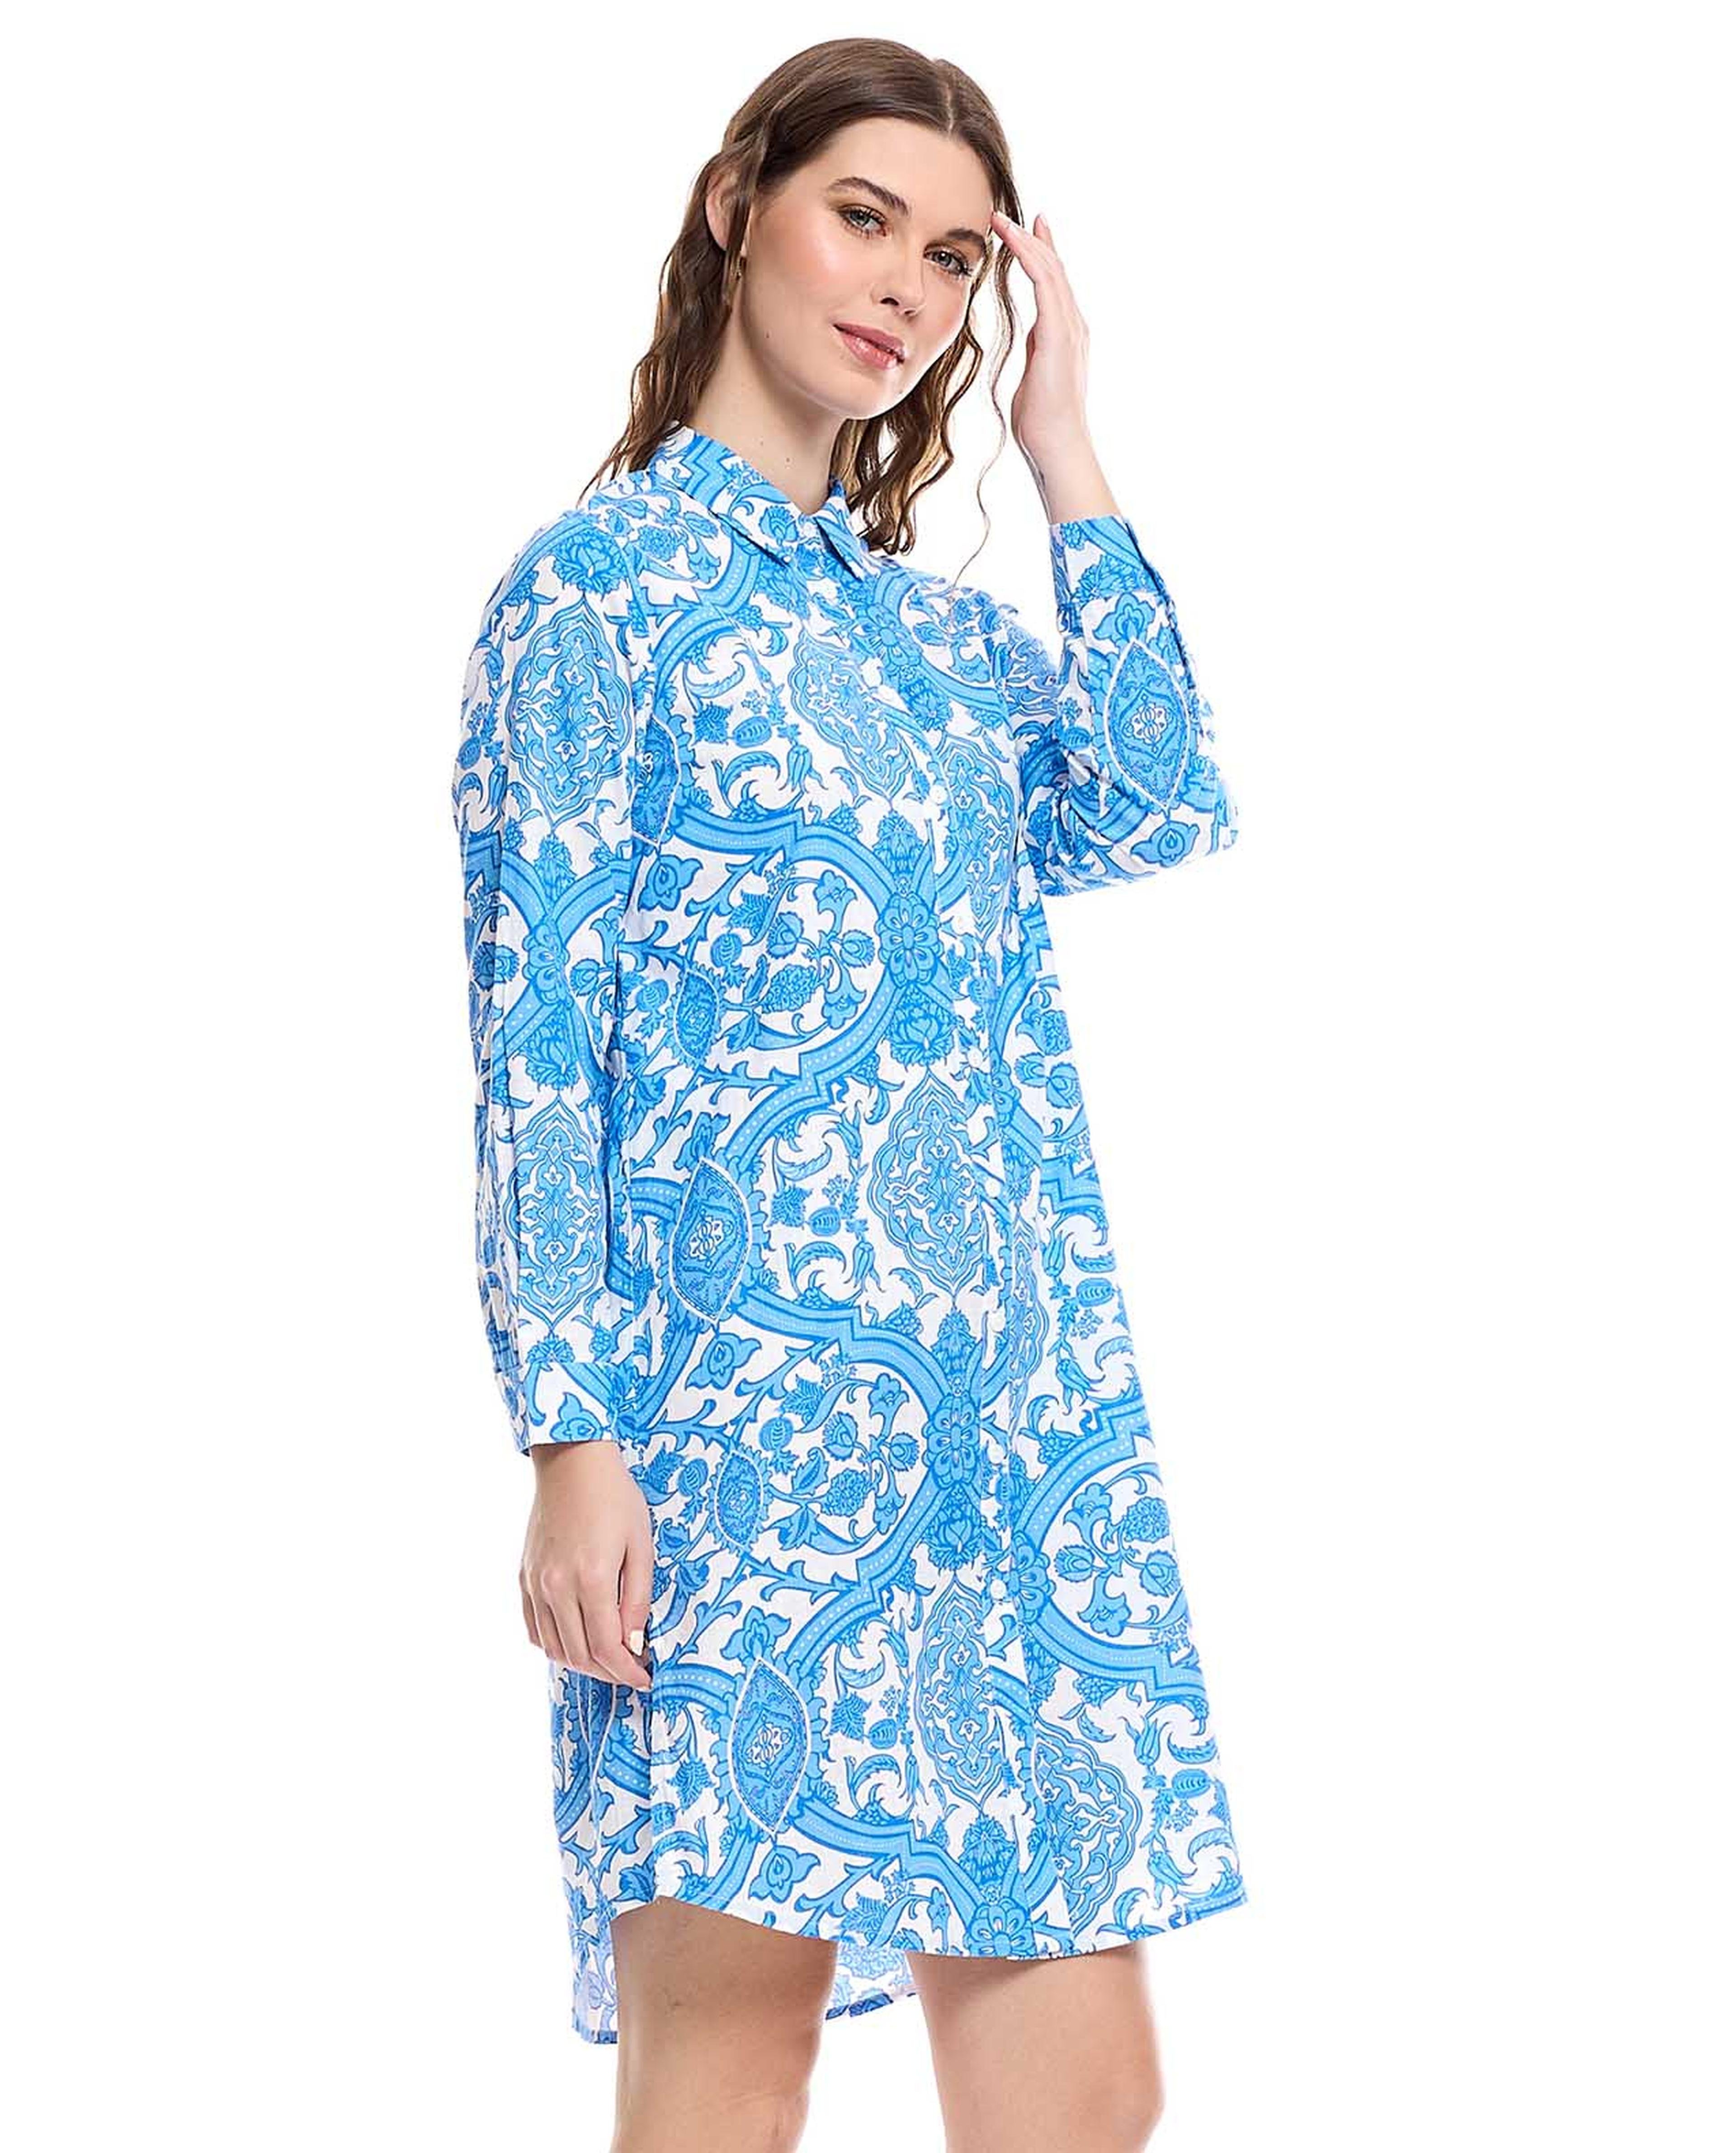 Patterned Tunic with Classic Collar and Long Sleeves